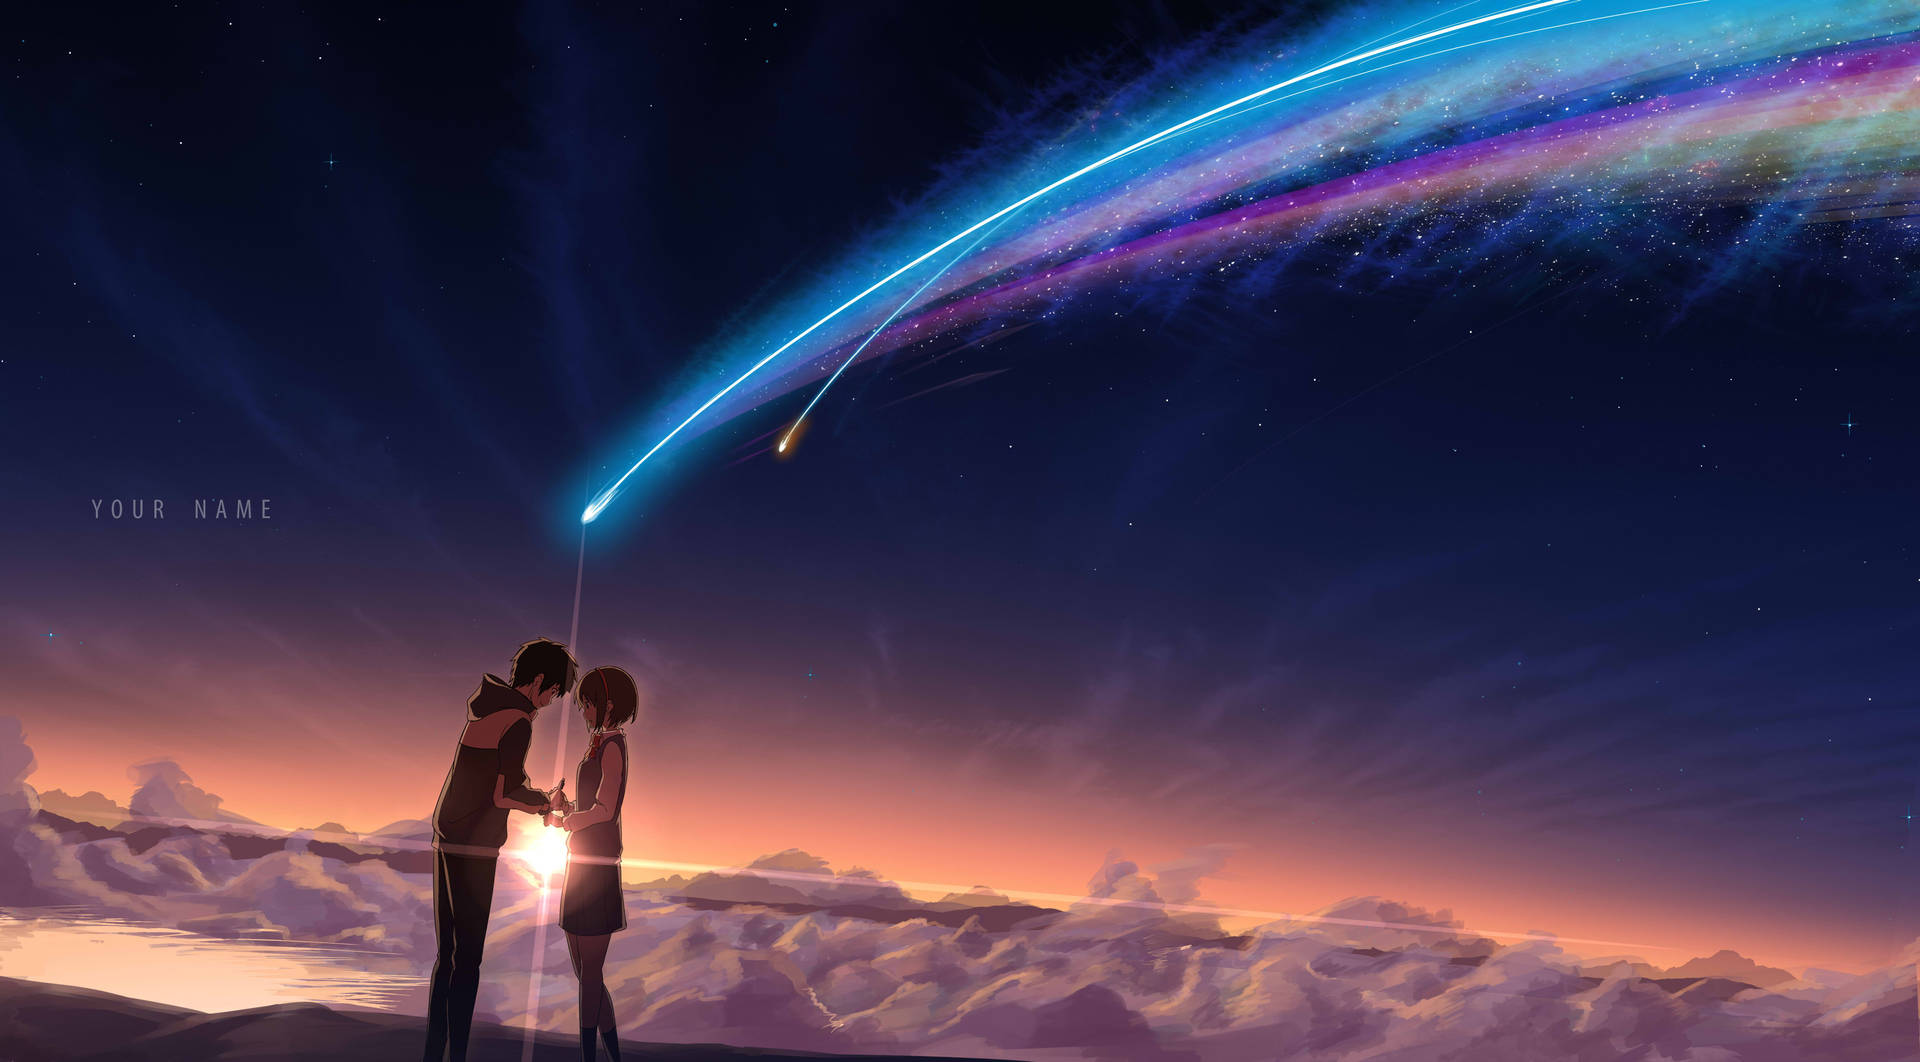 7015X3879 Your Name Wallpaper and Background